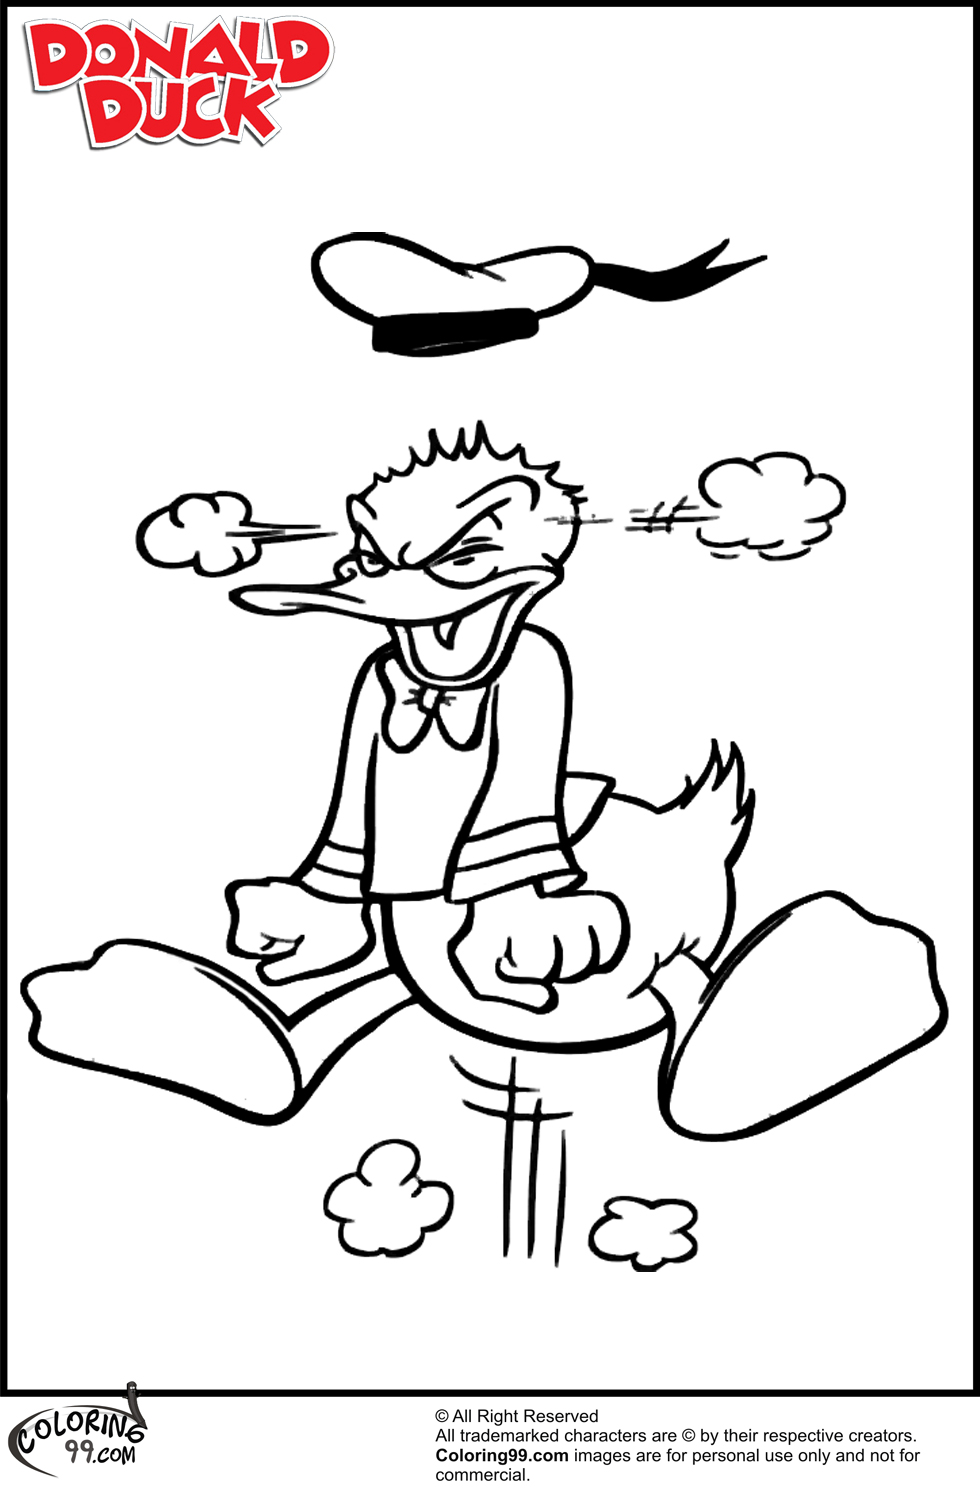 Donald Duck Coloring Pages | Team colors